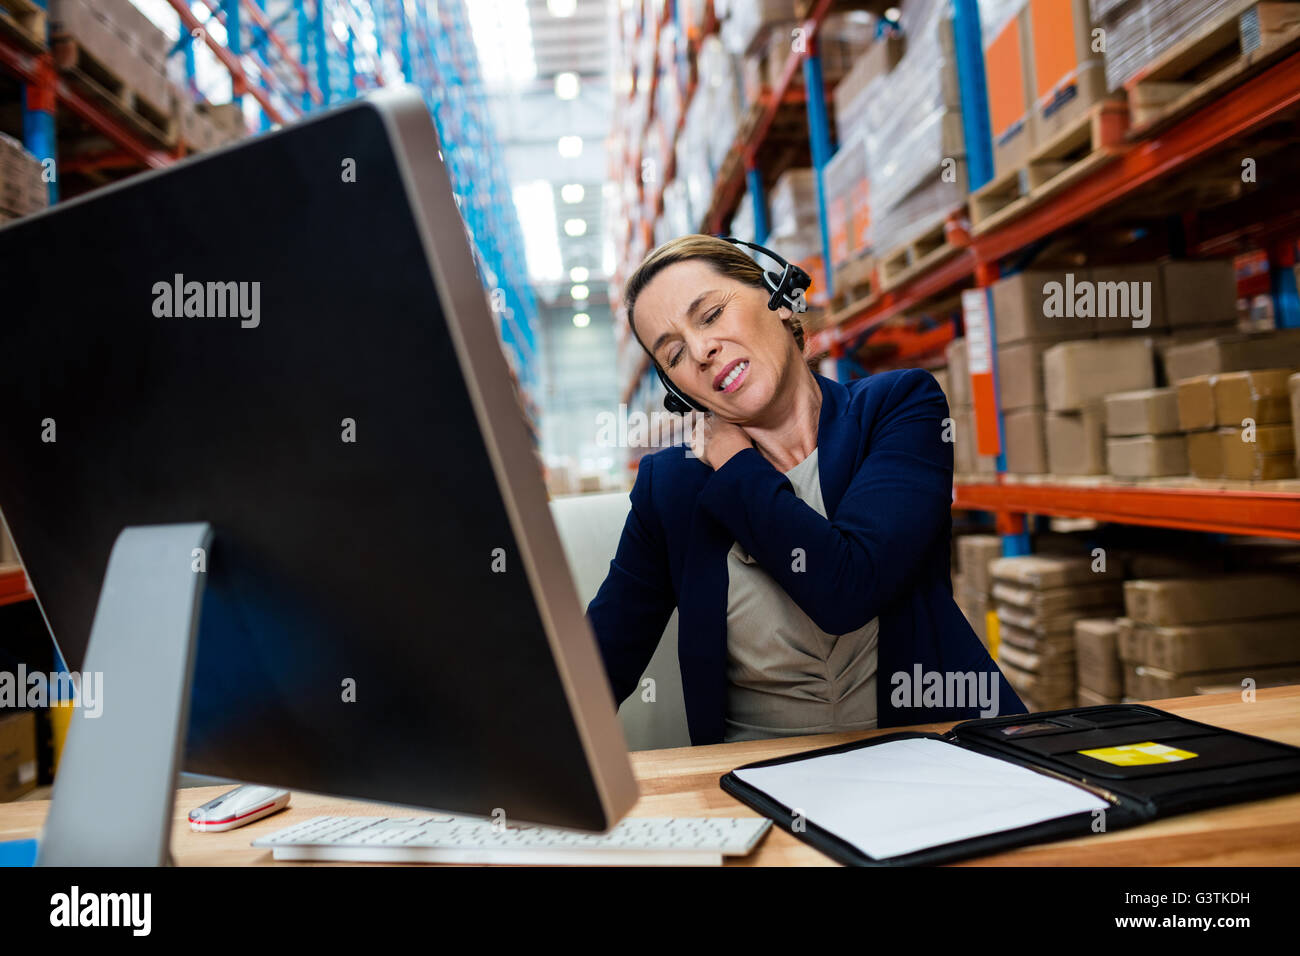 Warehouse manager with shoulder pain Stock Photo